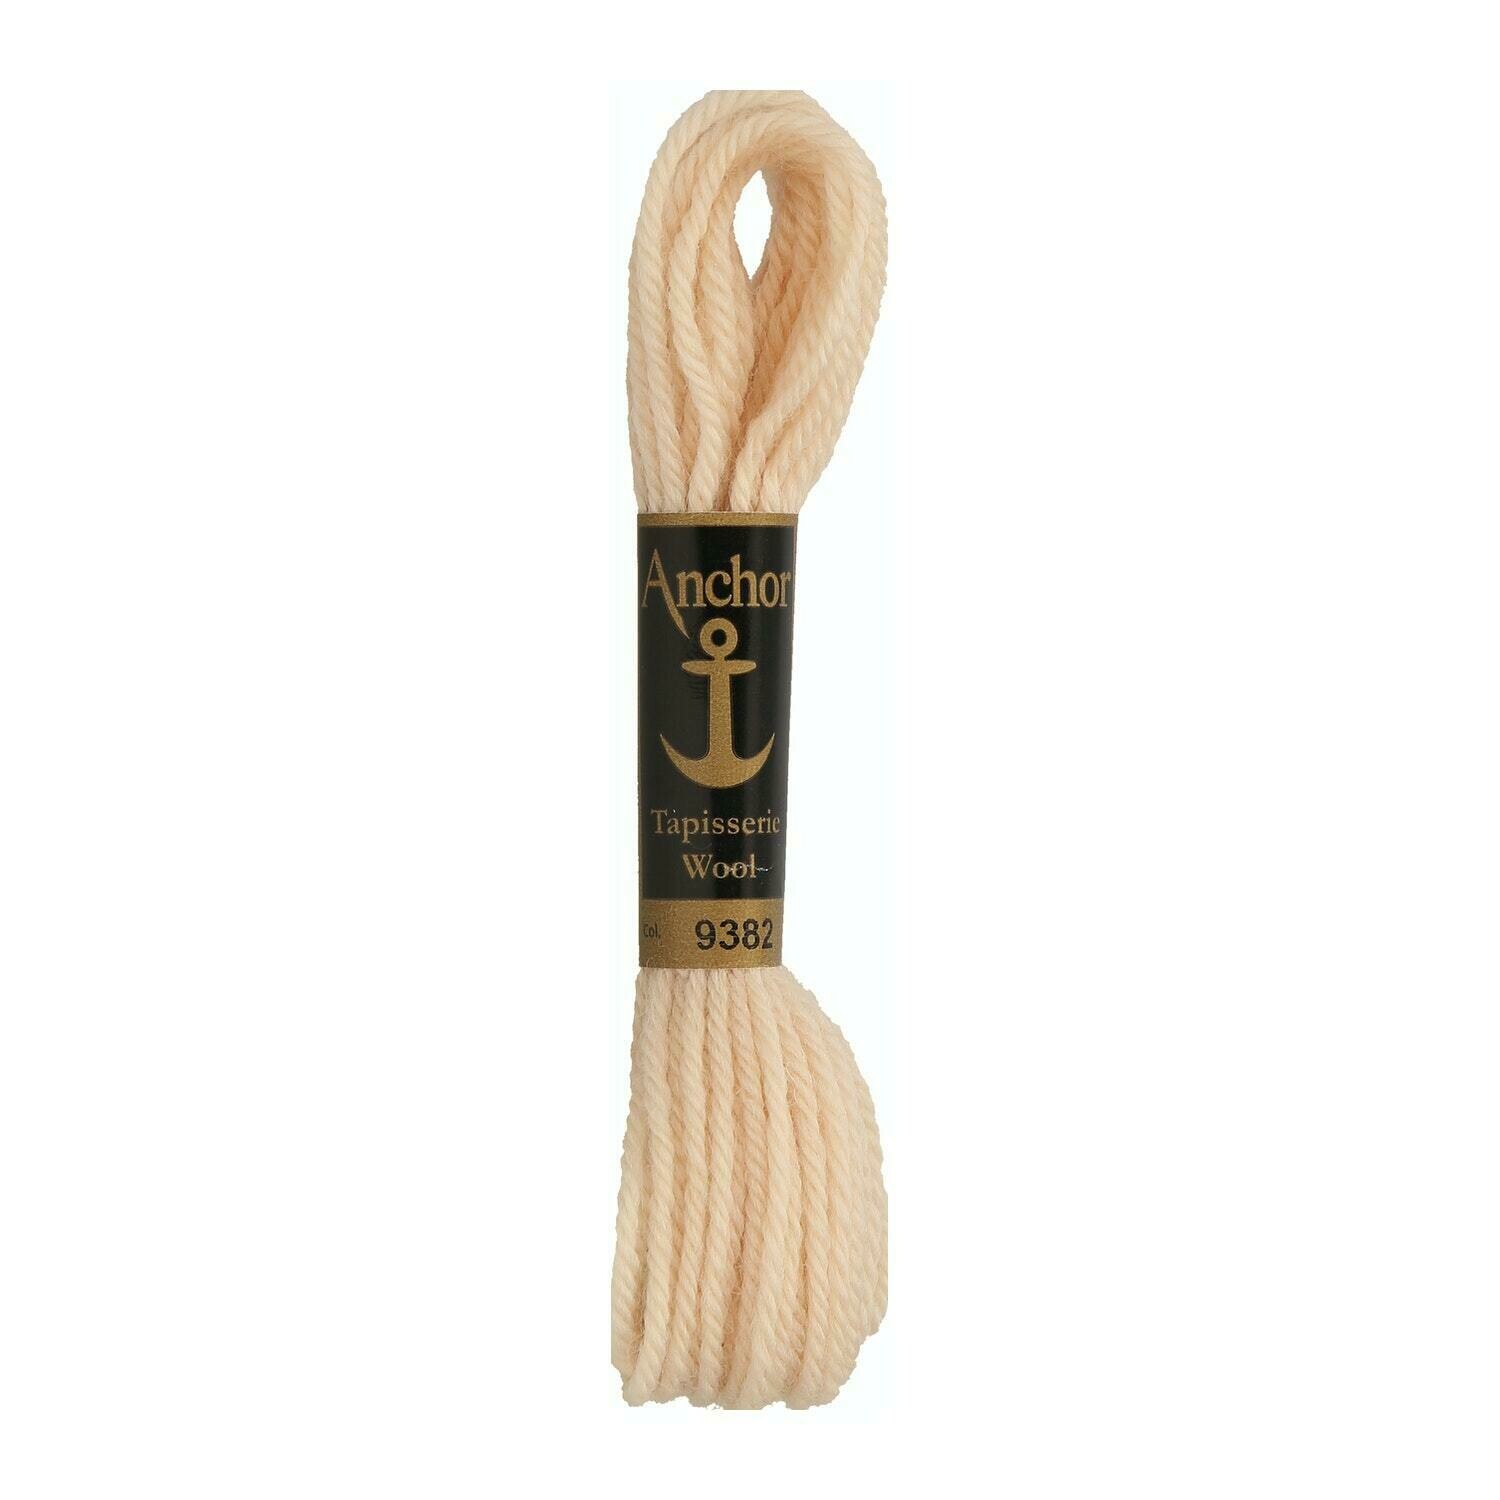 Anchor Tapisserie Wool #09382